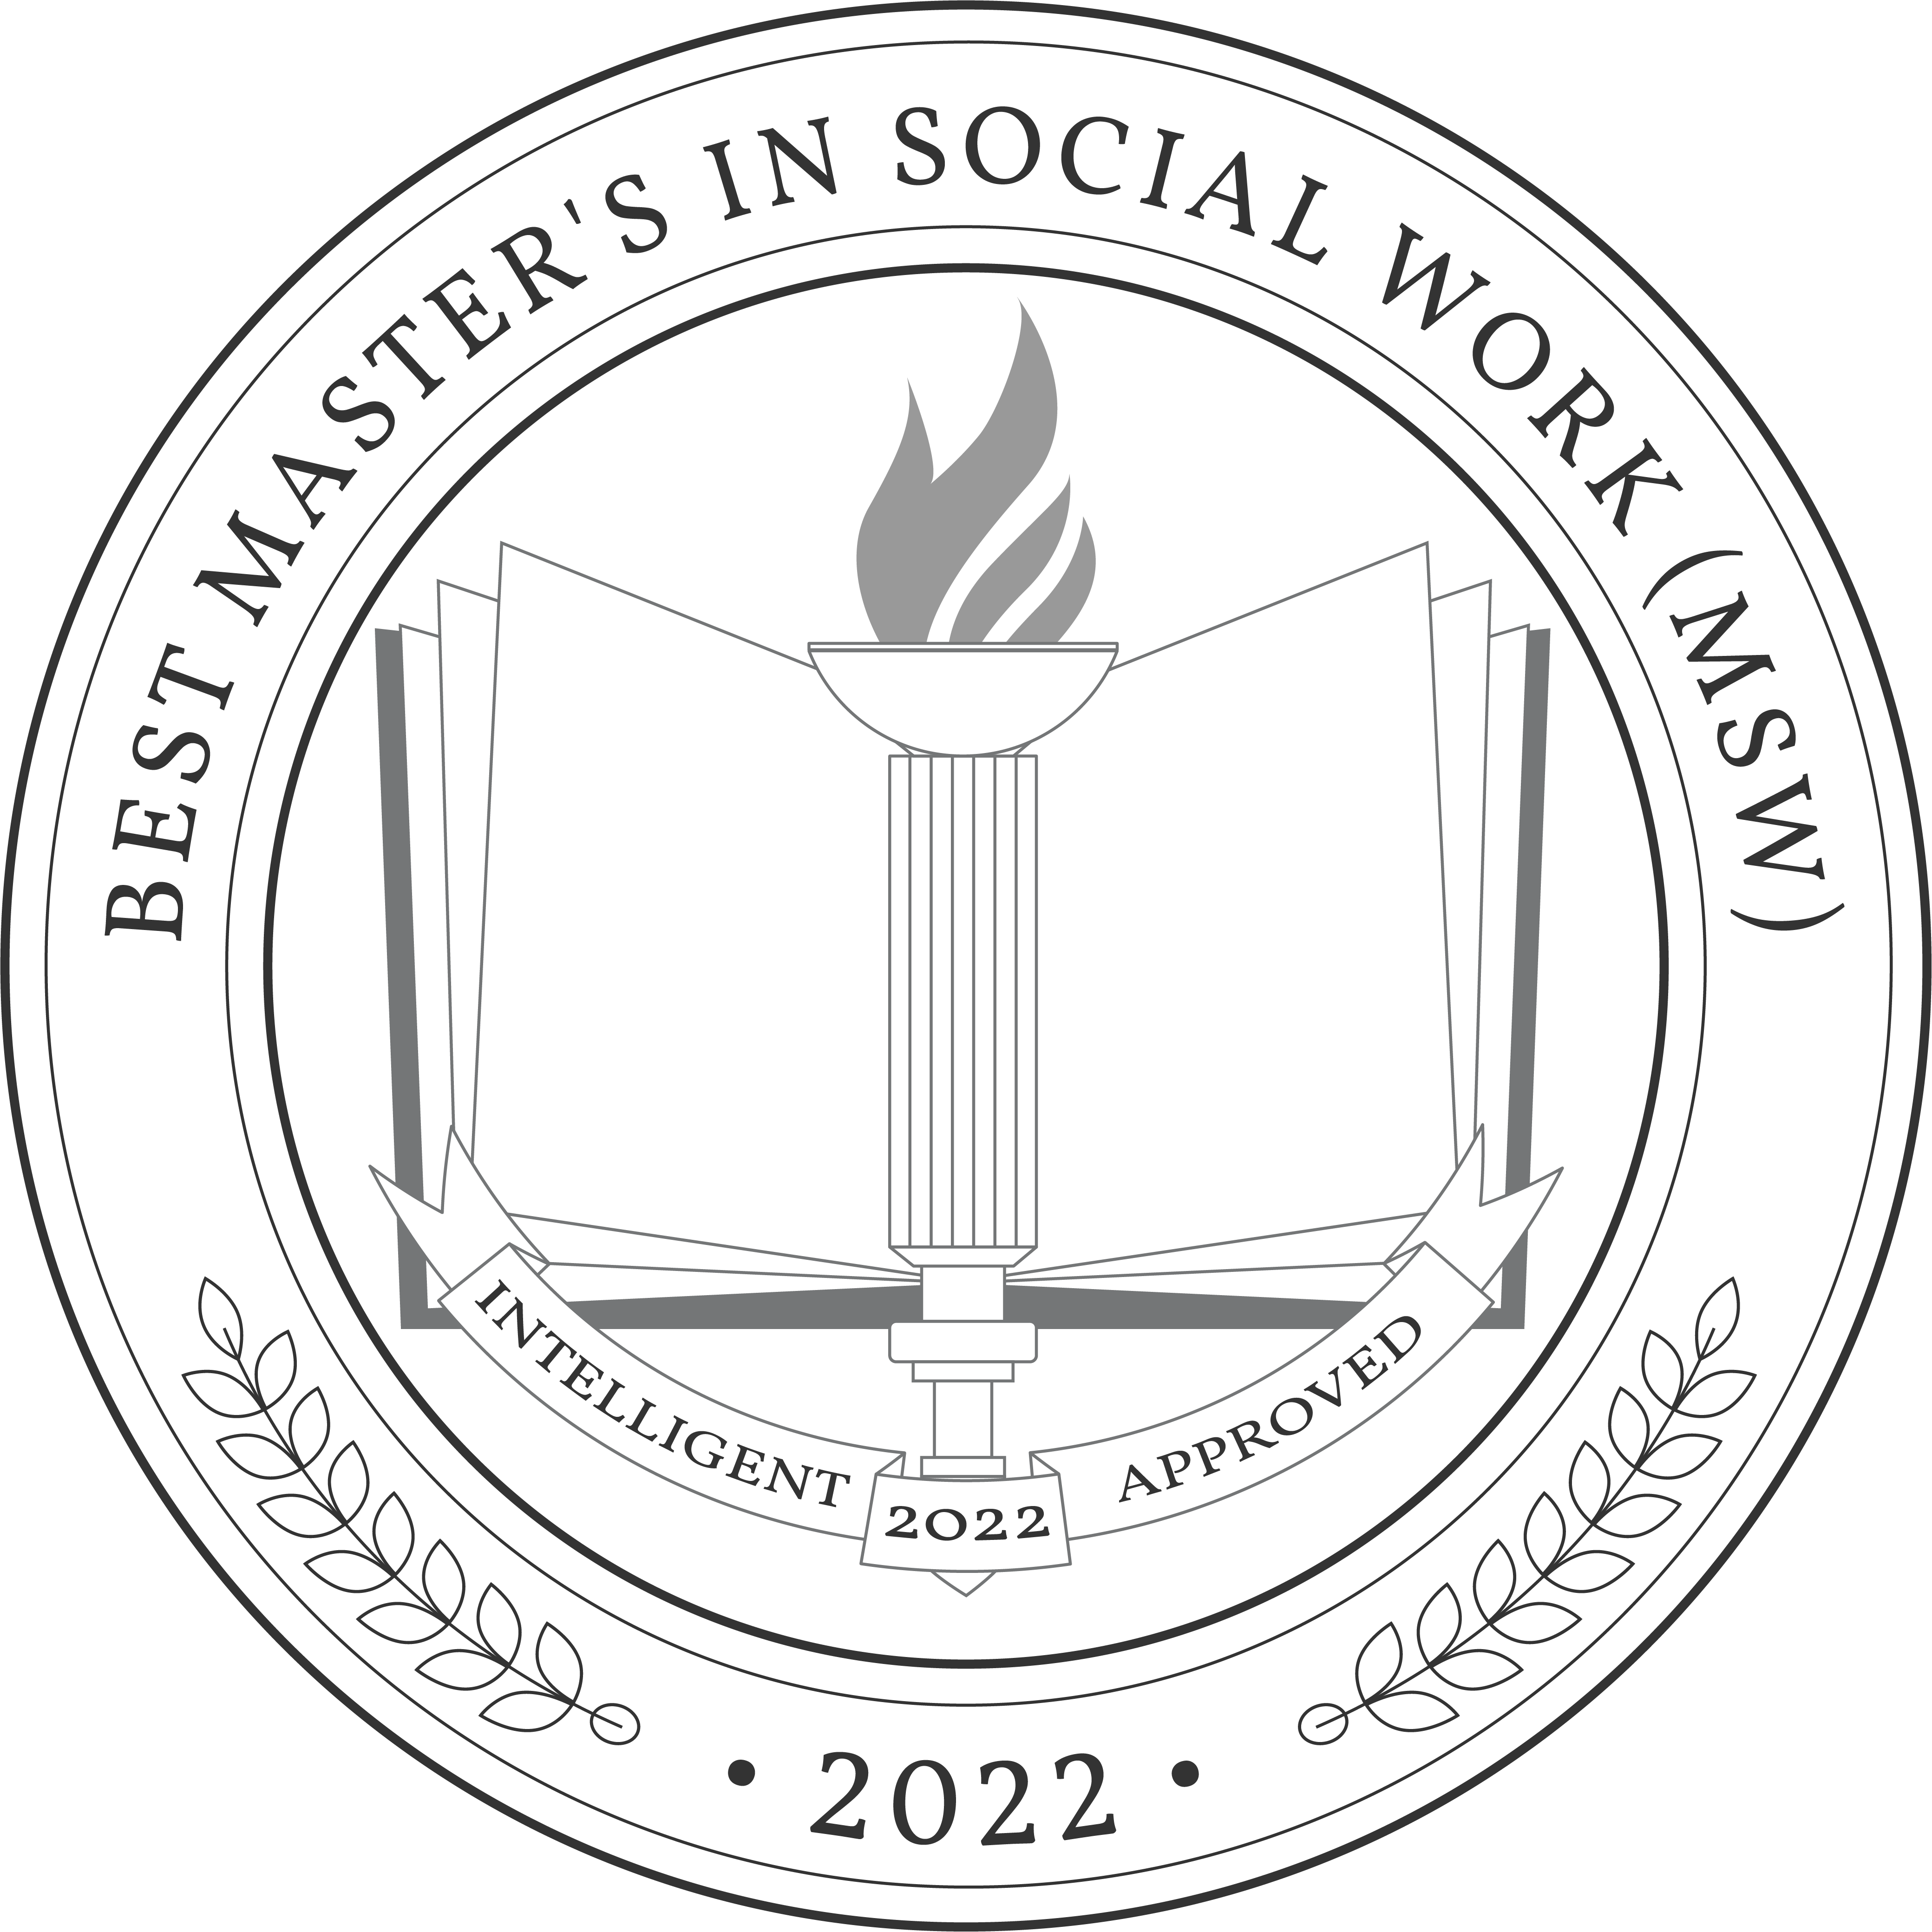 The Best Master's in Social Work (MSW) Degree Programs